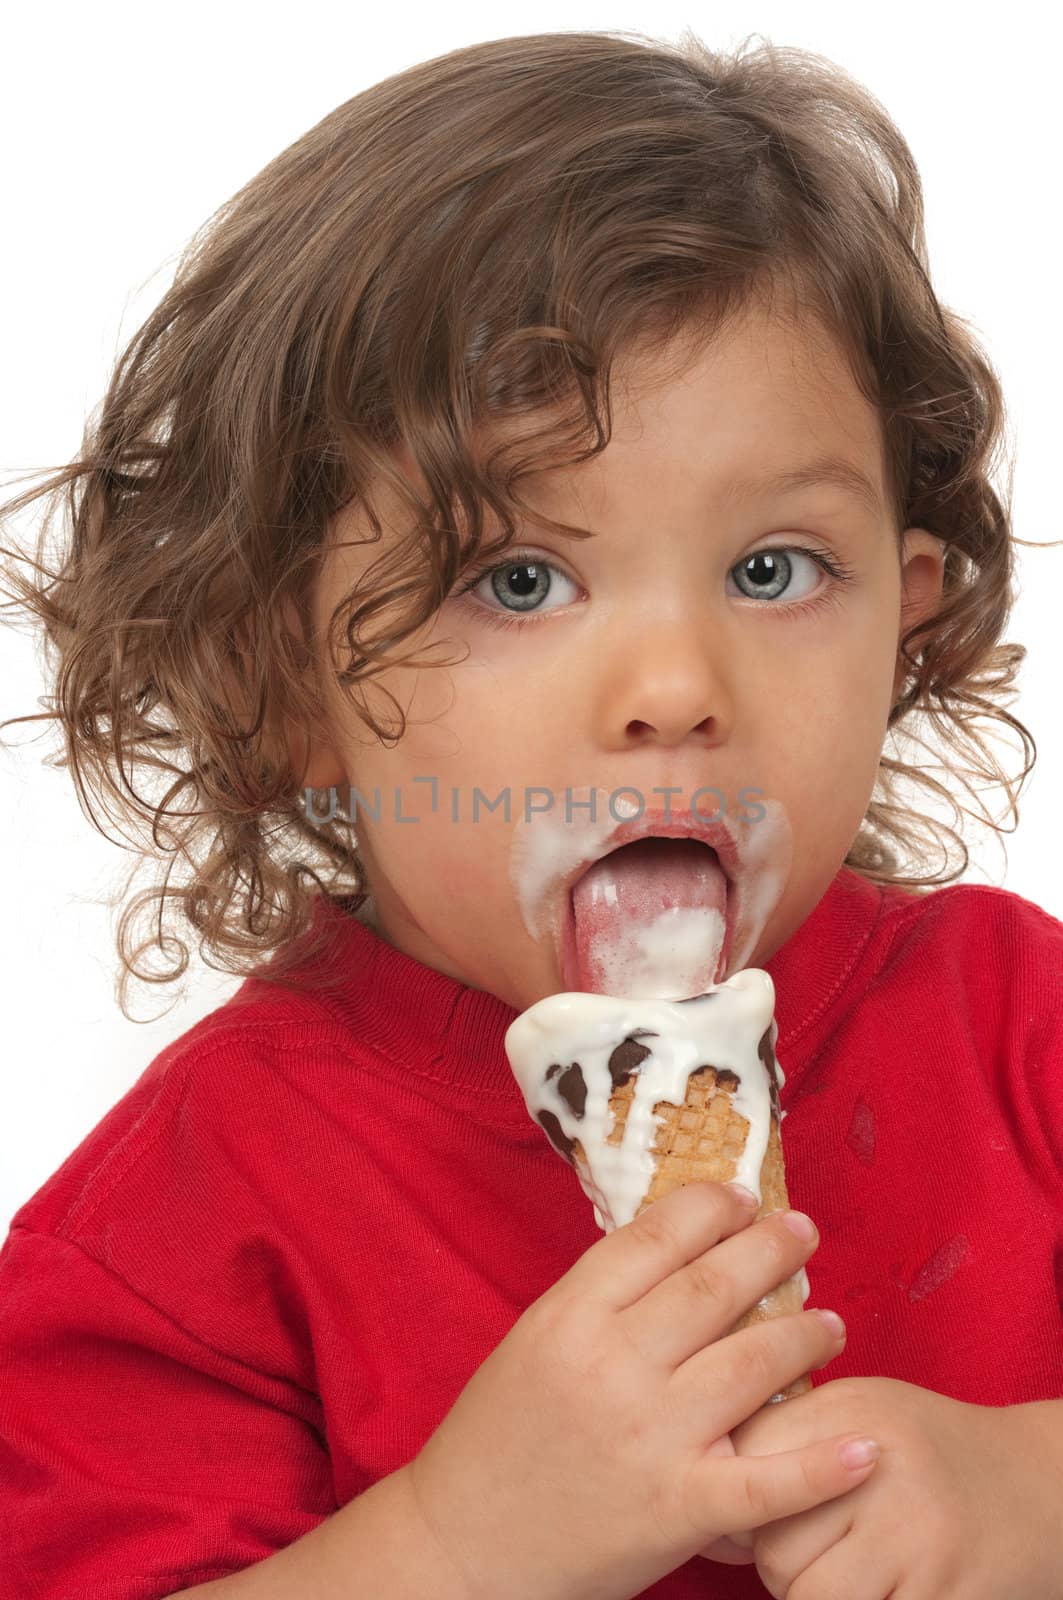 A little child eating ice cream 